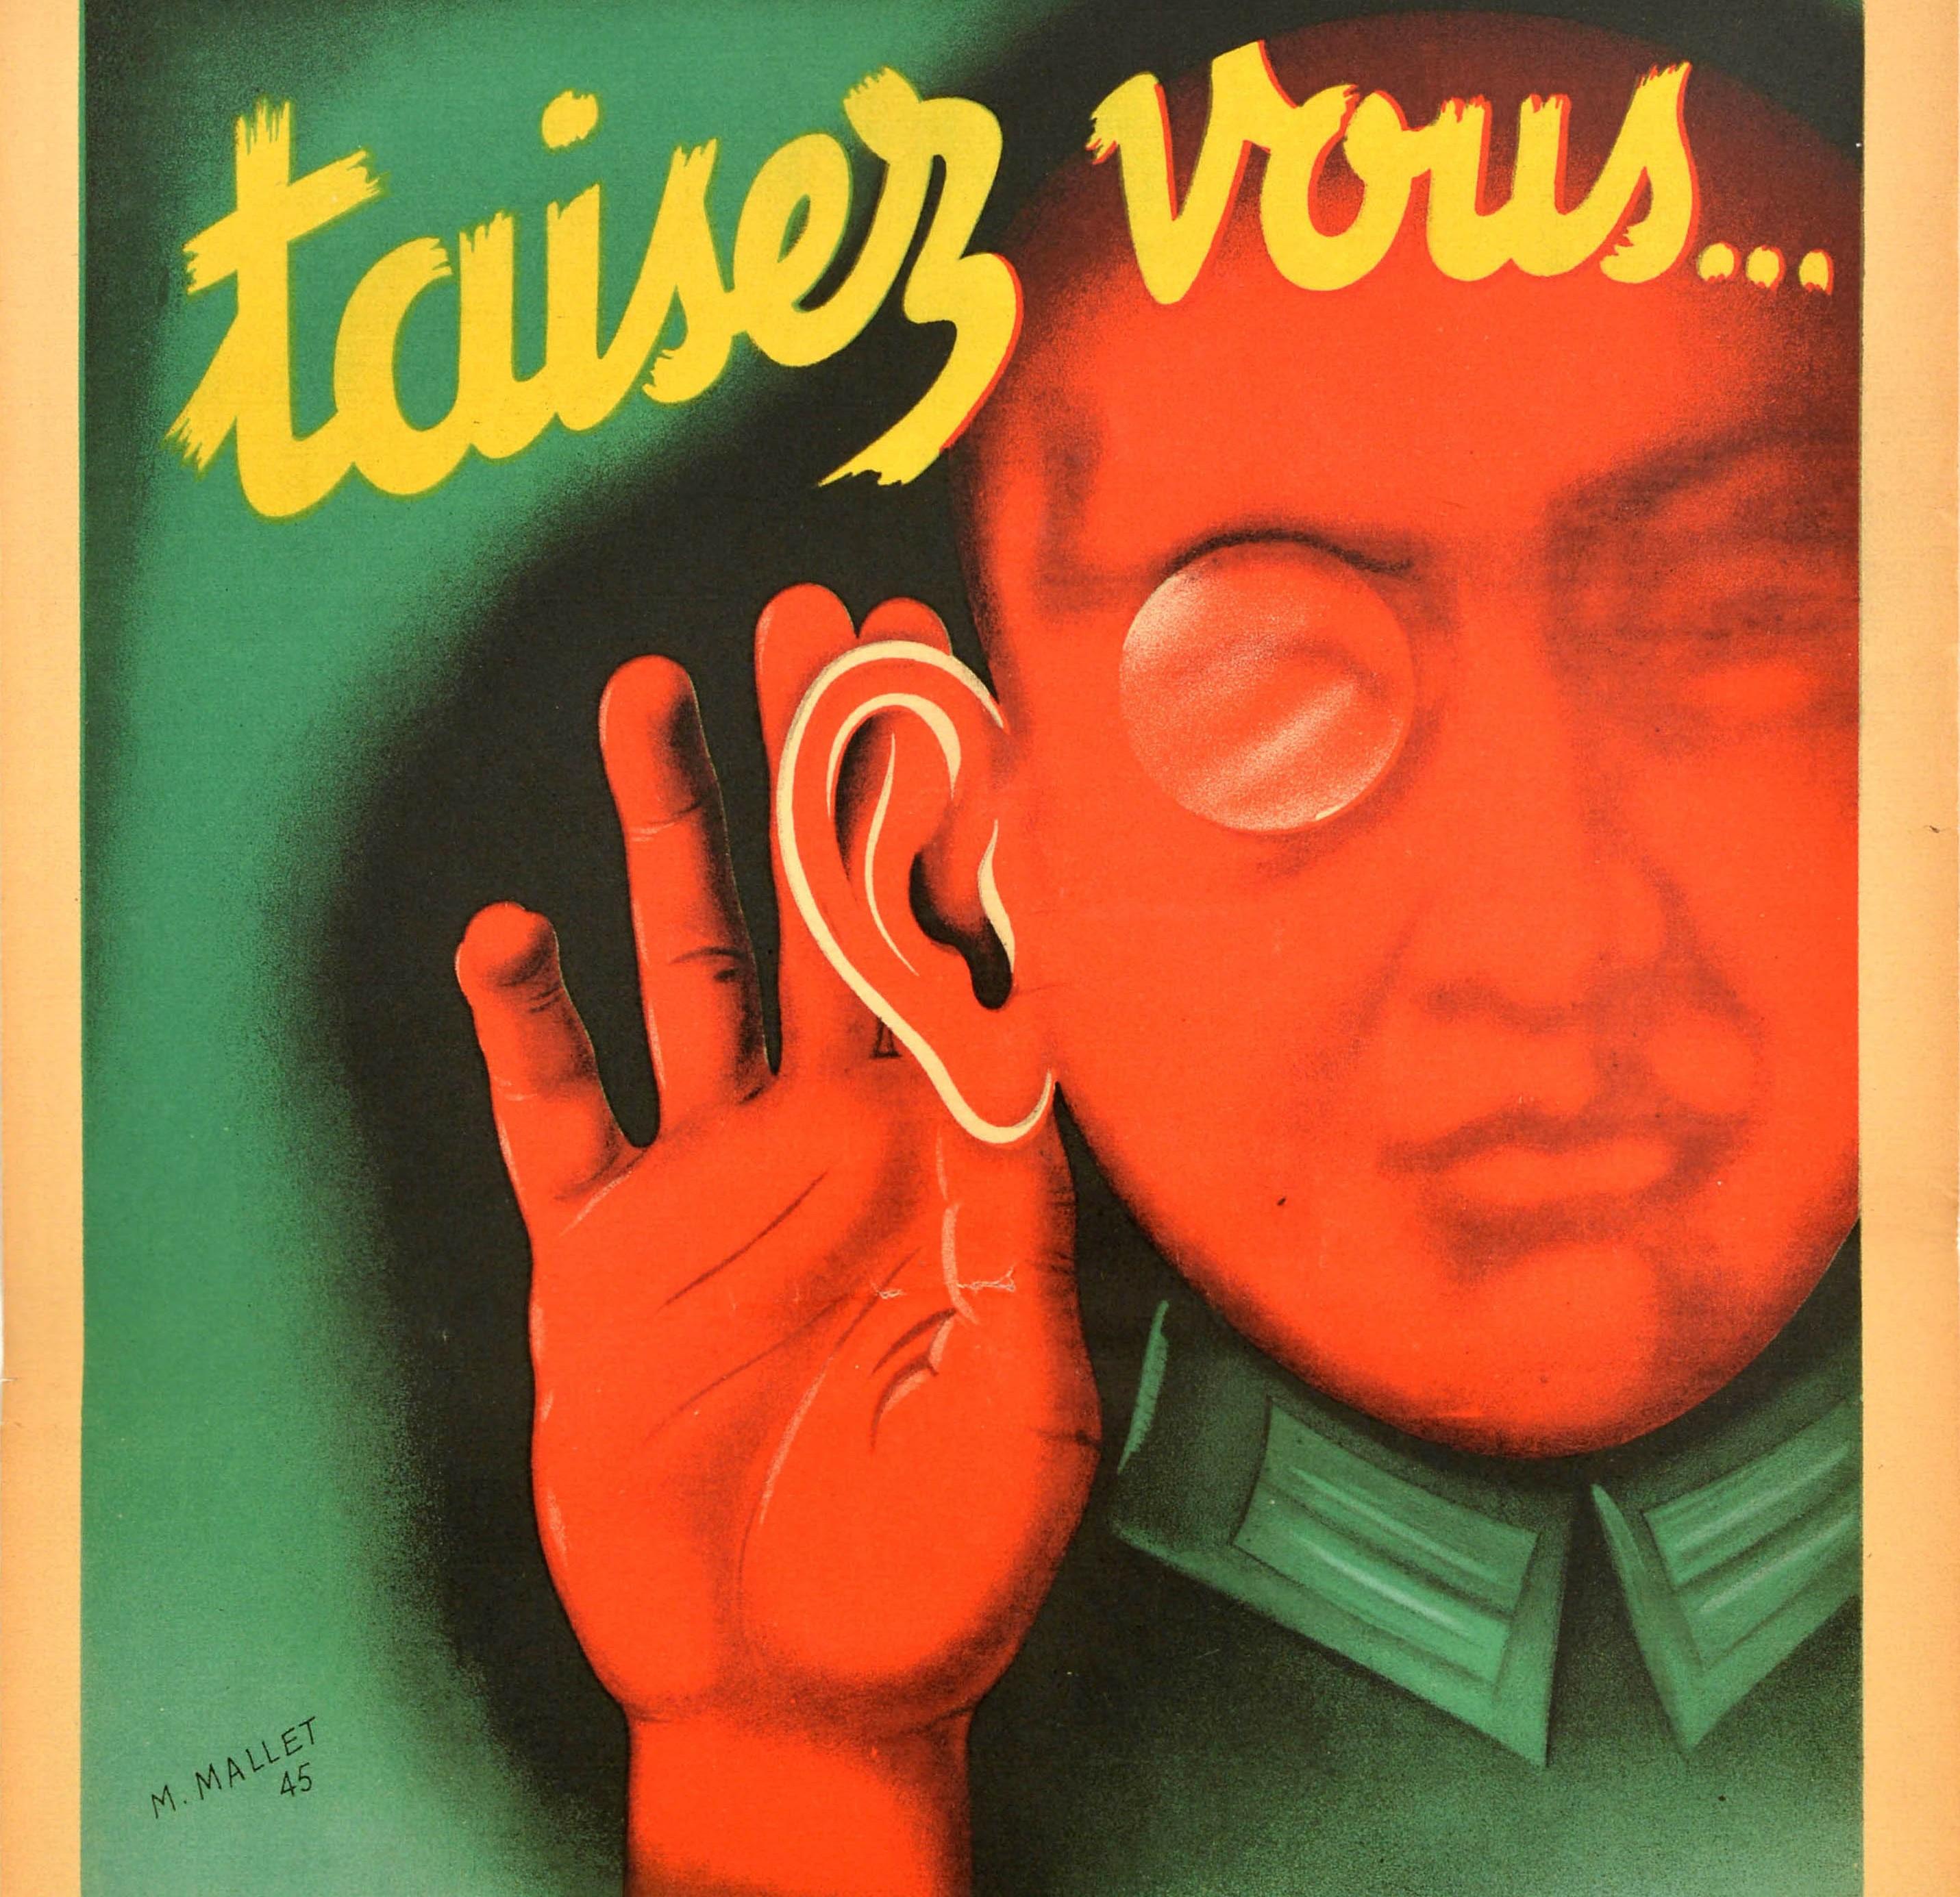 Original Vintage Poster Taisez Vous Be Quiet Spies Remain Post WWII Occupation - Brown Print by M. Mallet